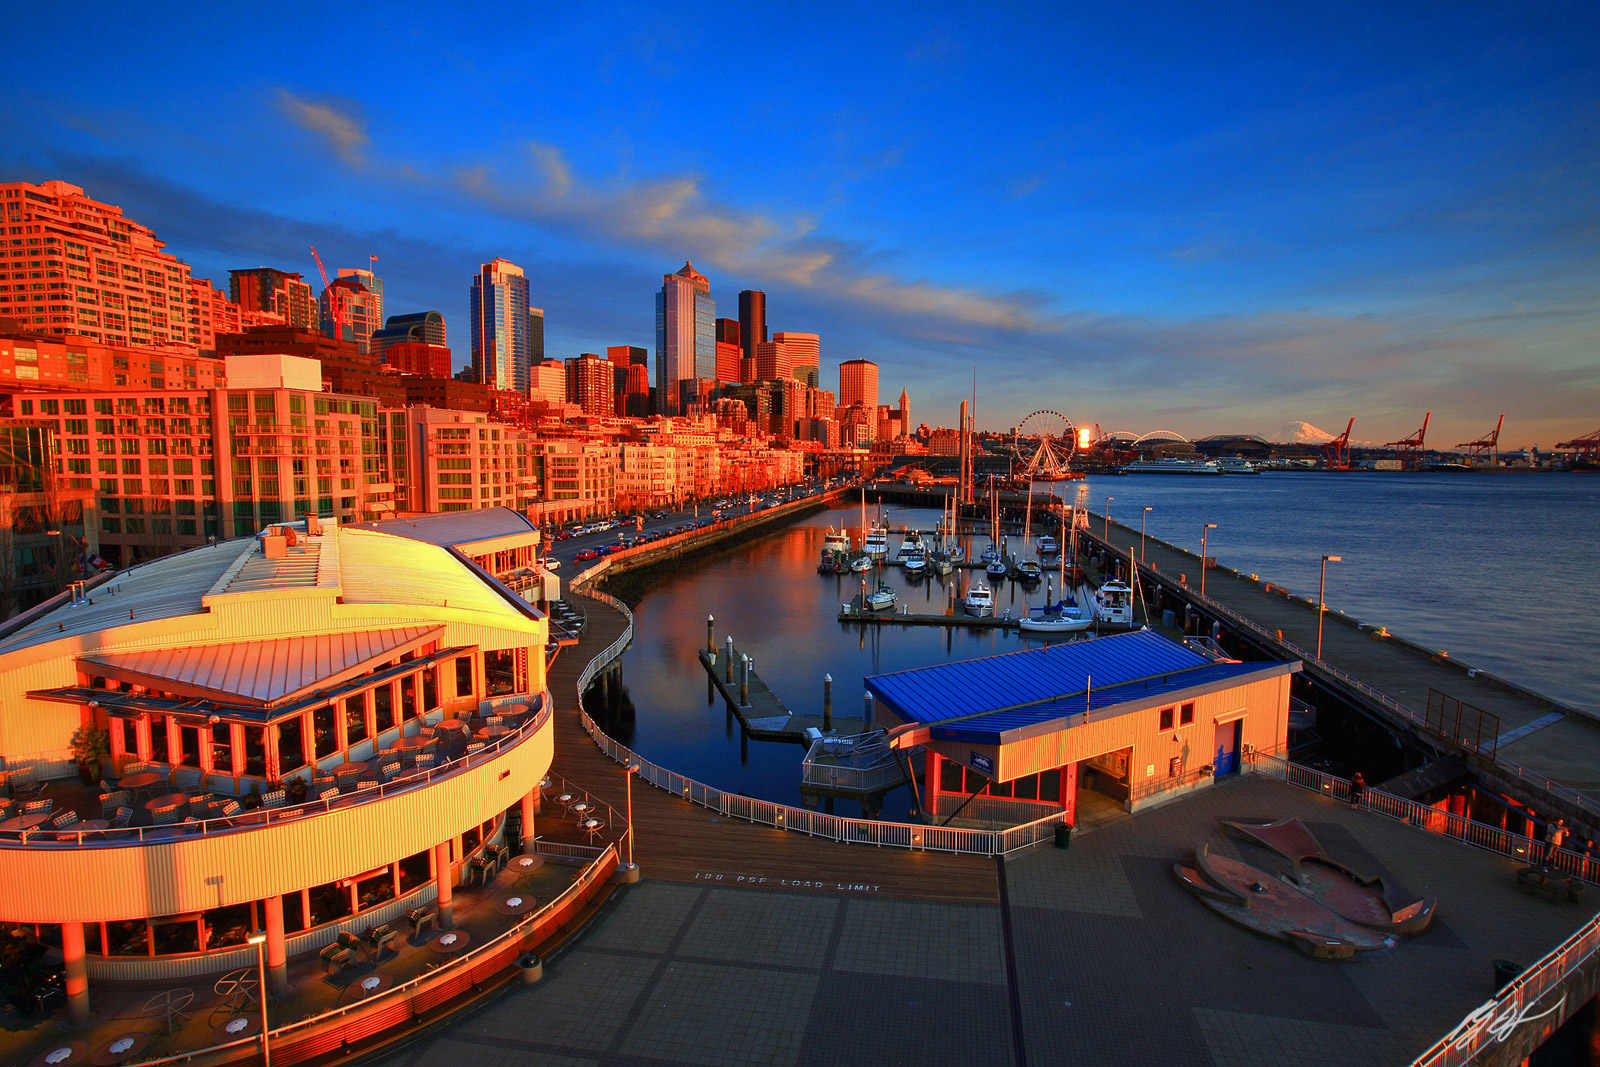 Evening Light on the Seattle Waterfront from Pier 66 in Seattle Washington